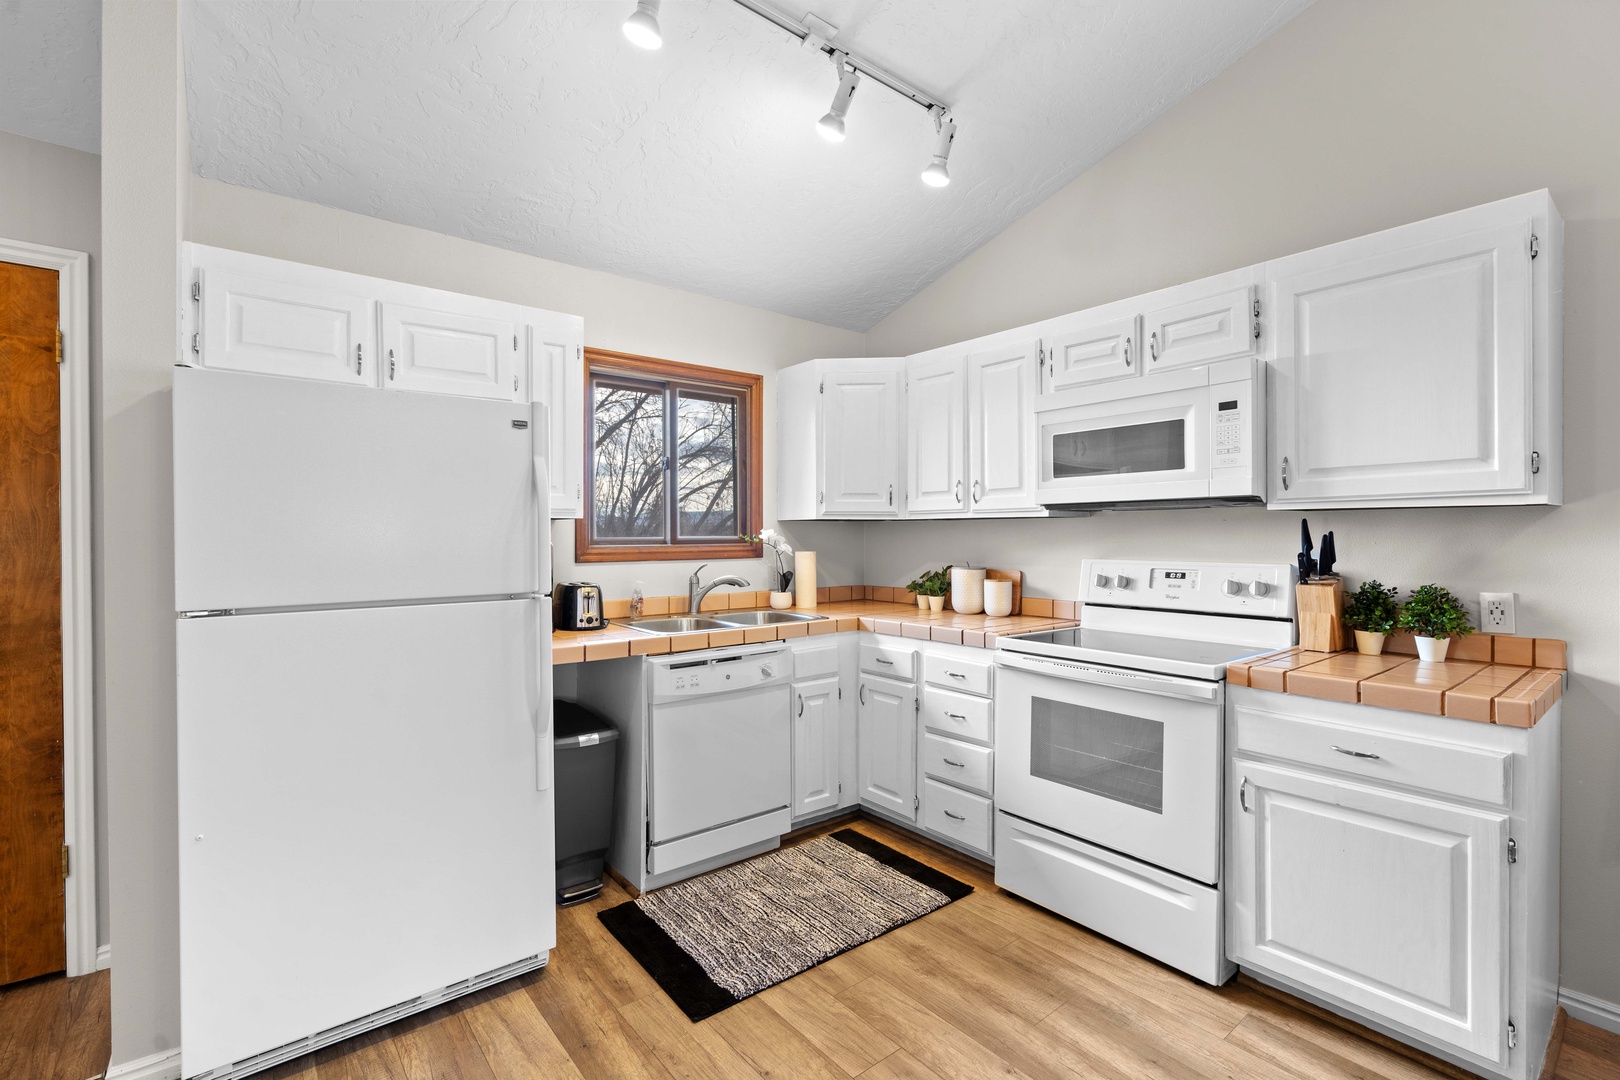 The airy, open kitchen offers ample space & all the comforts of home